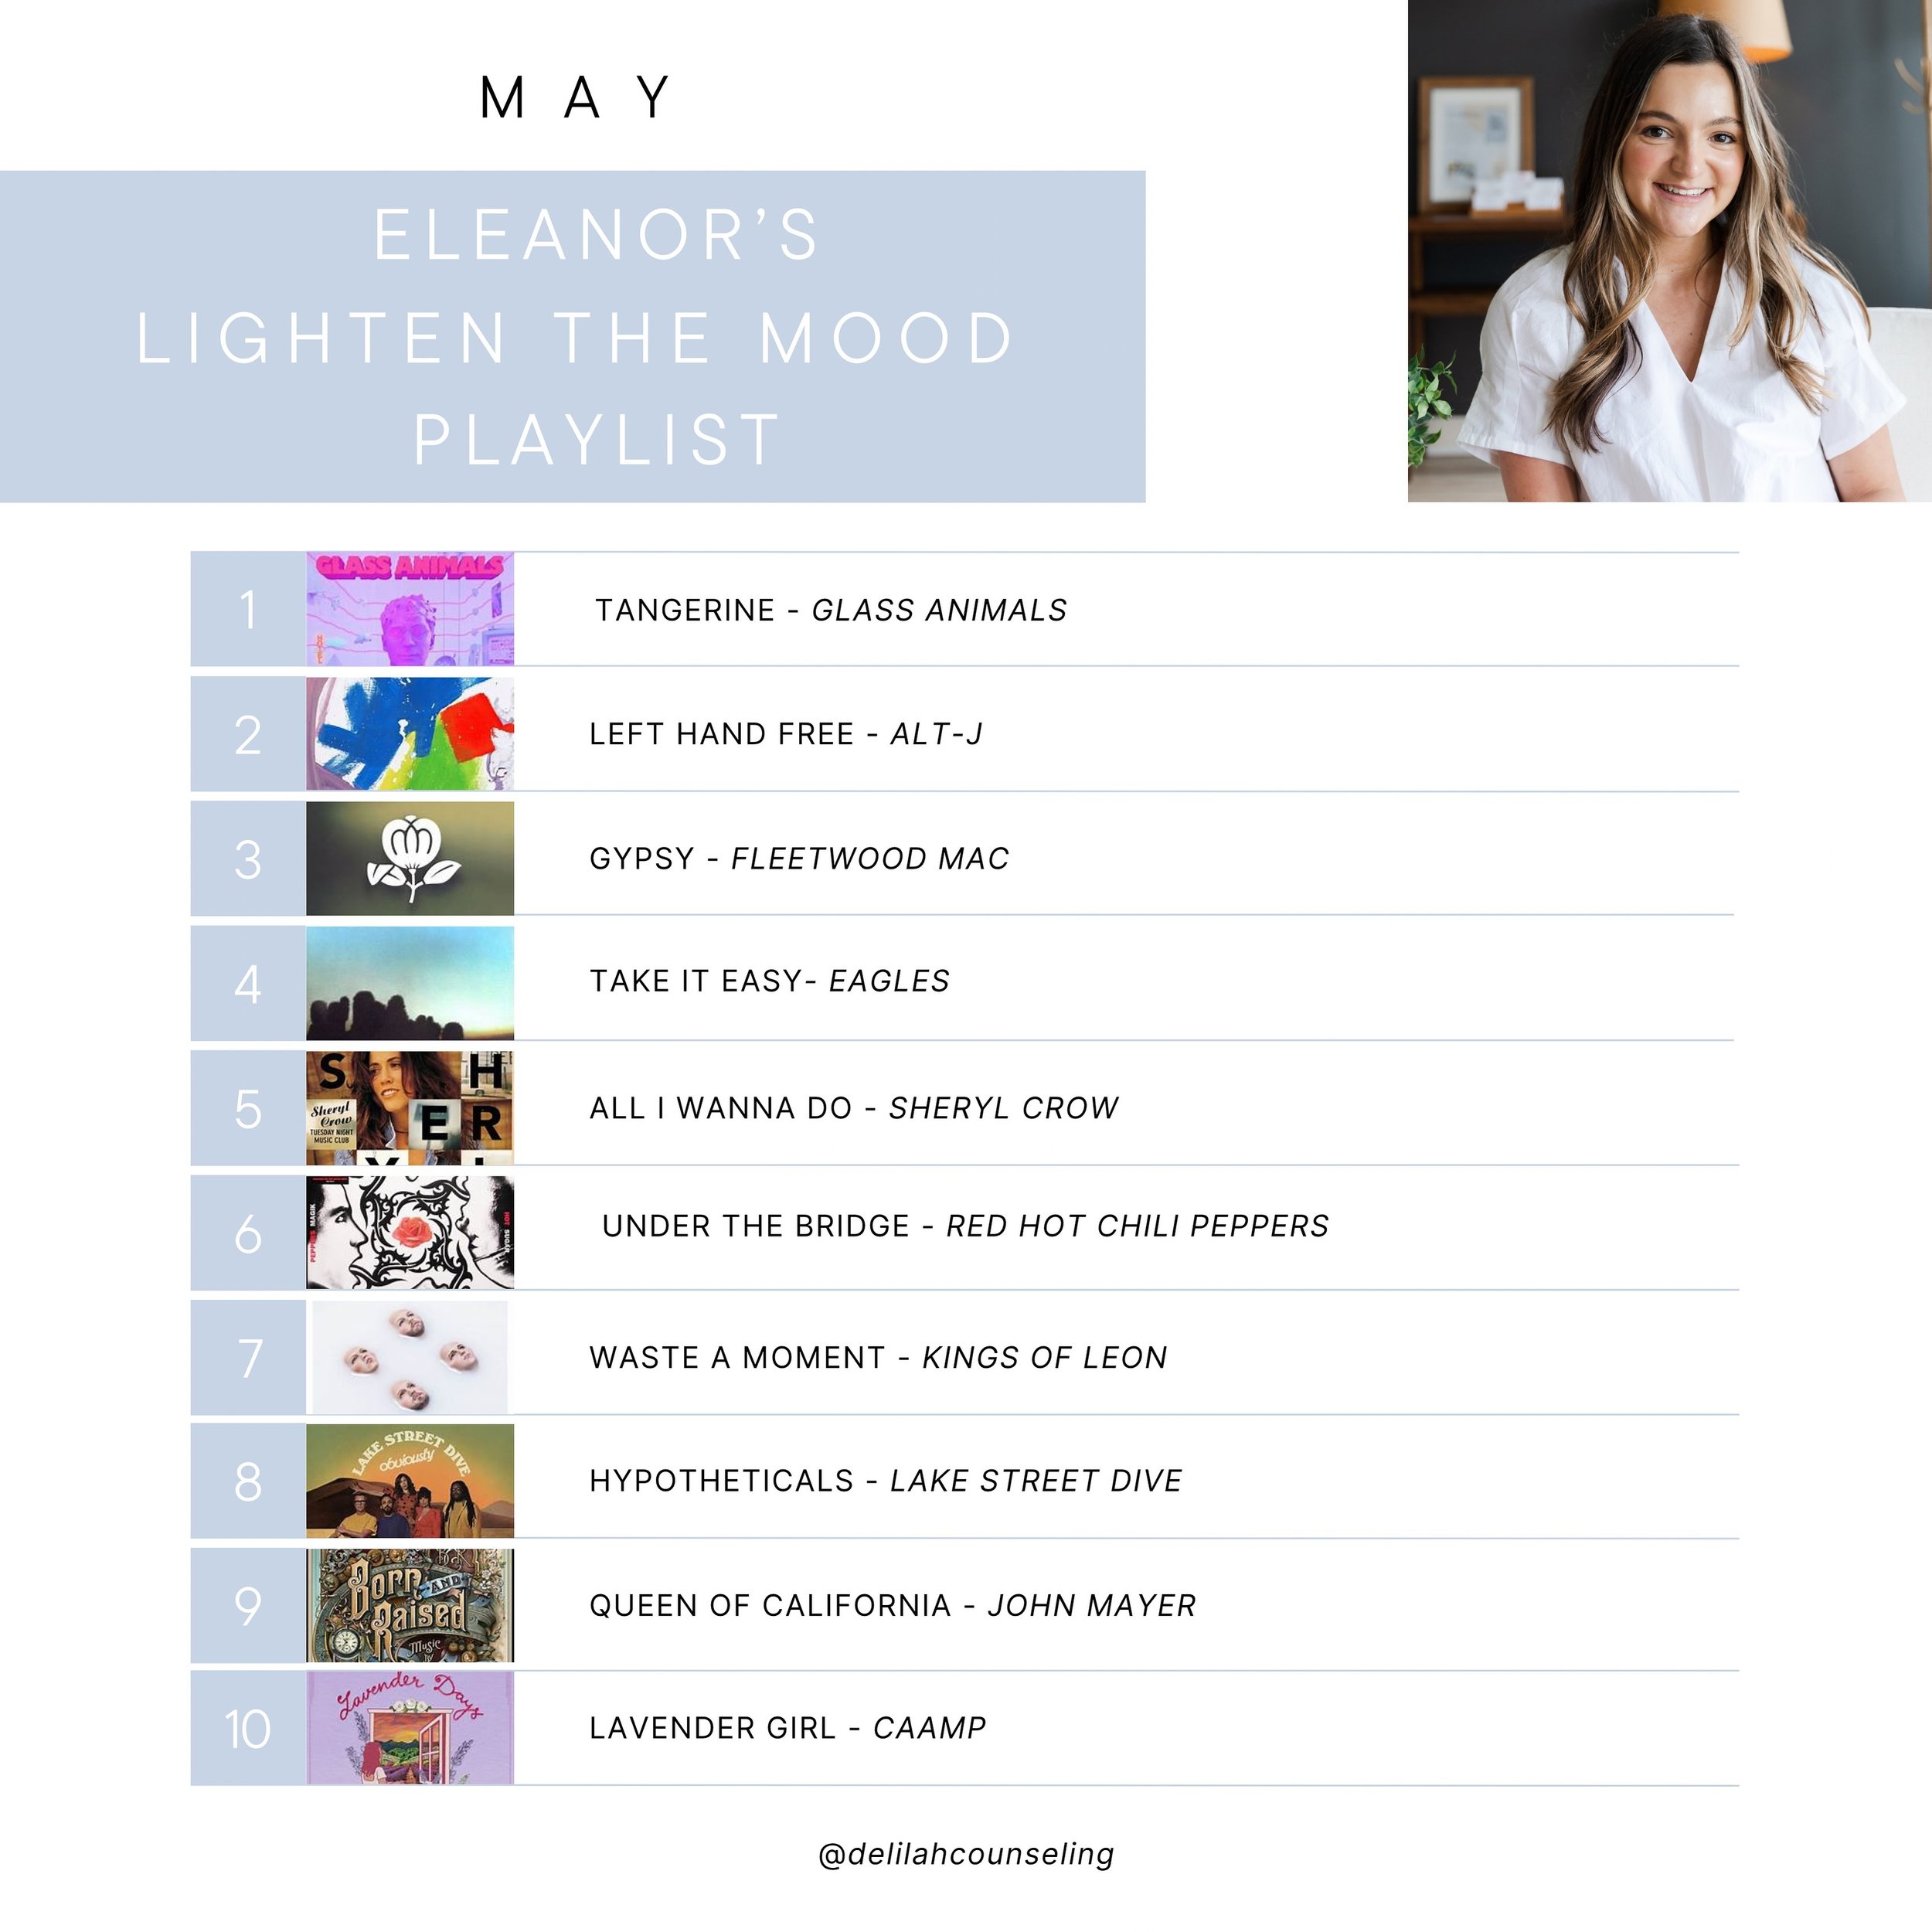 &ldquo;Longer days and summer weather are finally upon us. Here are a few tunes that get me excited for summer &amp; always lighten the mood!&rdquo; - Eleanor Estes, Delilah Therapist ✨